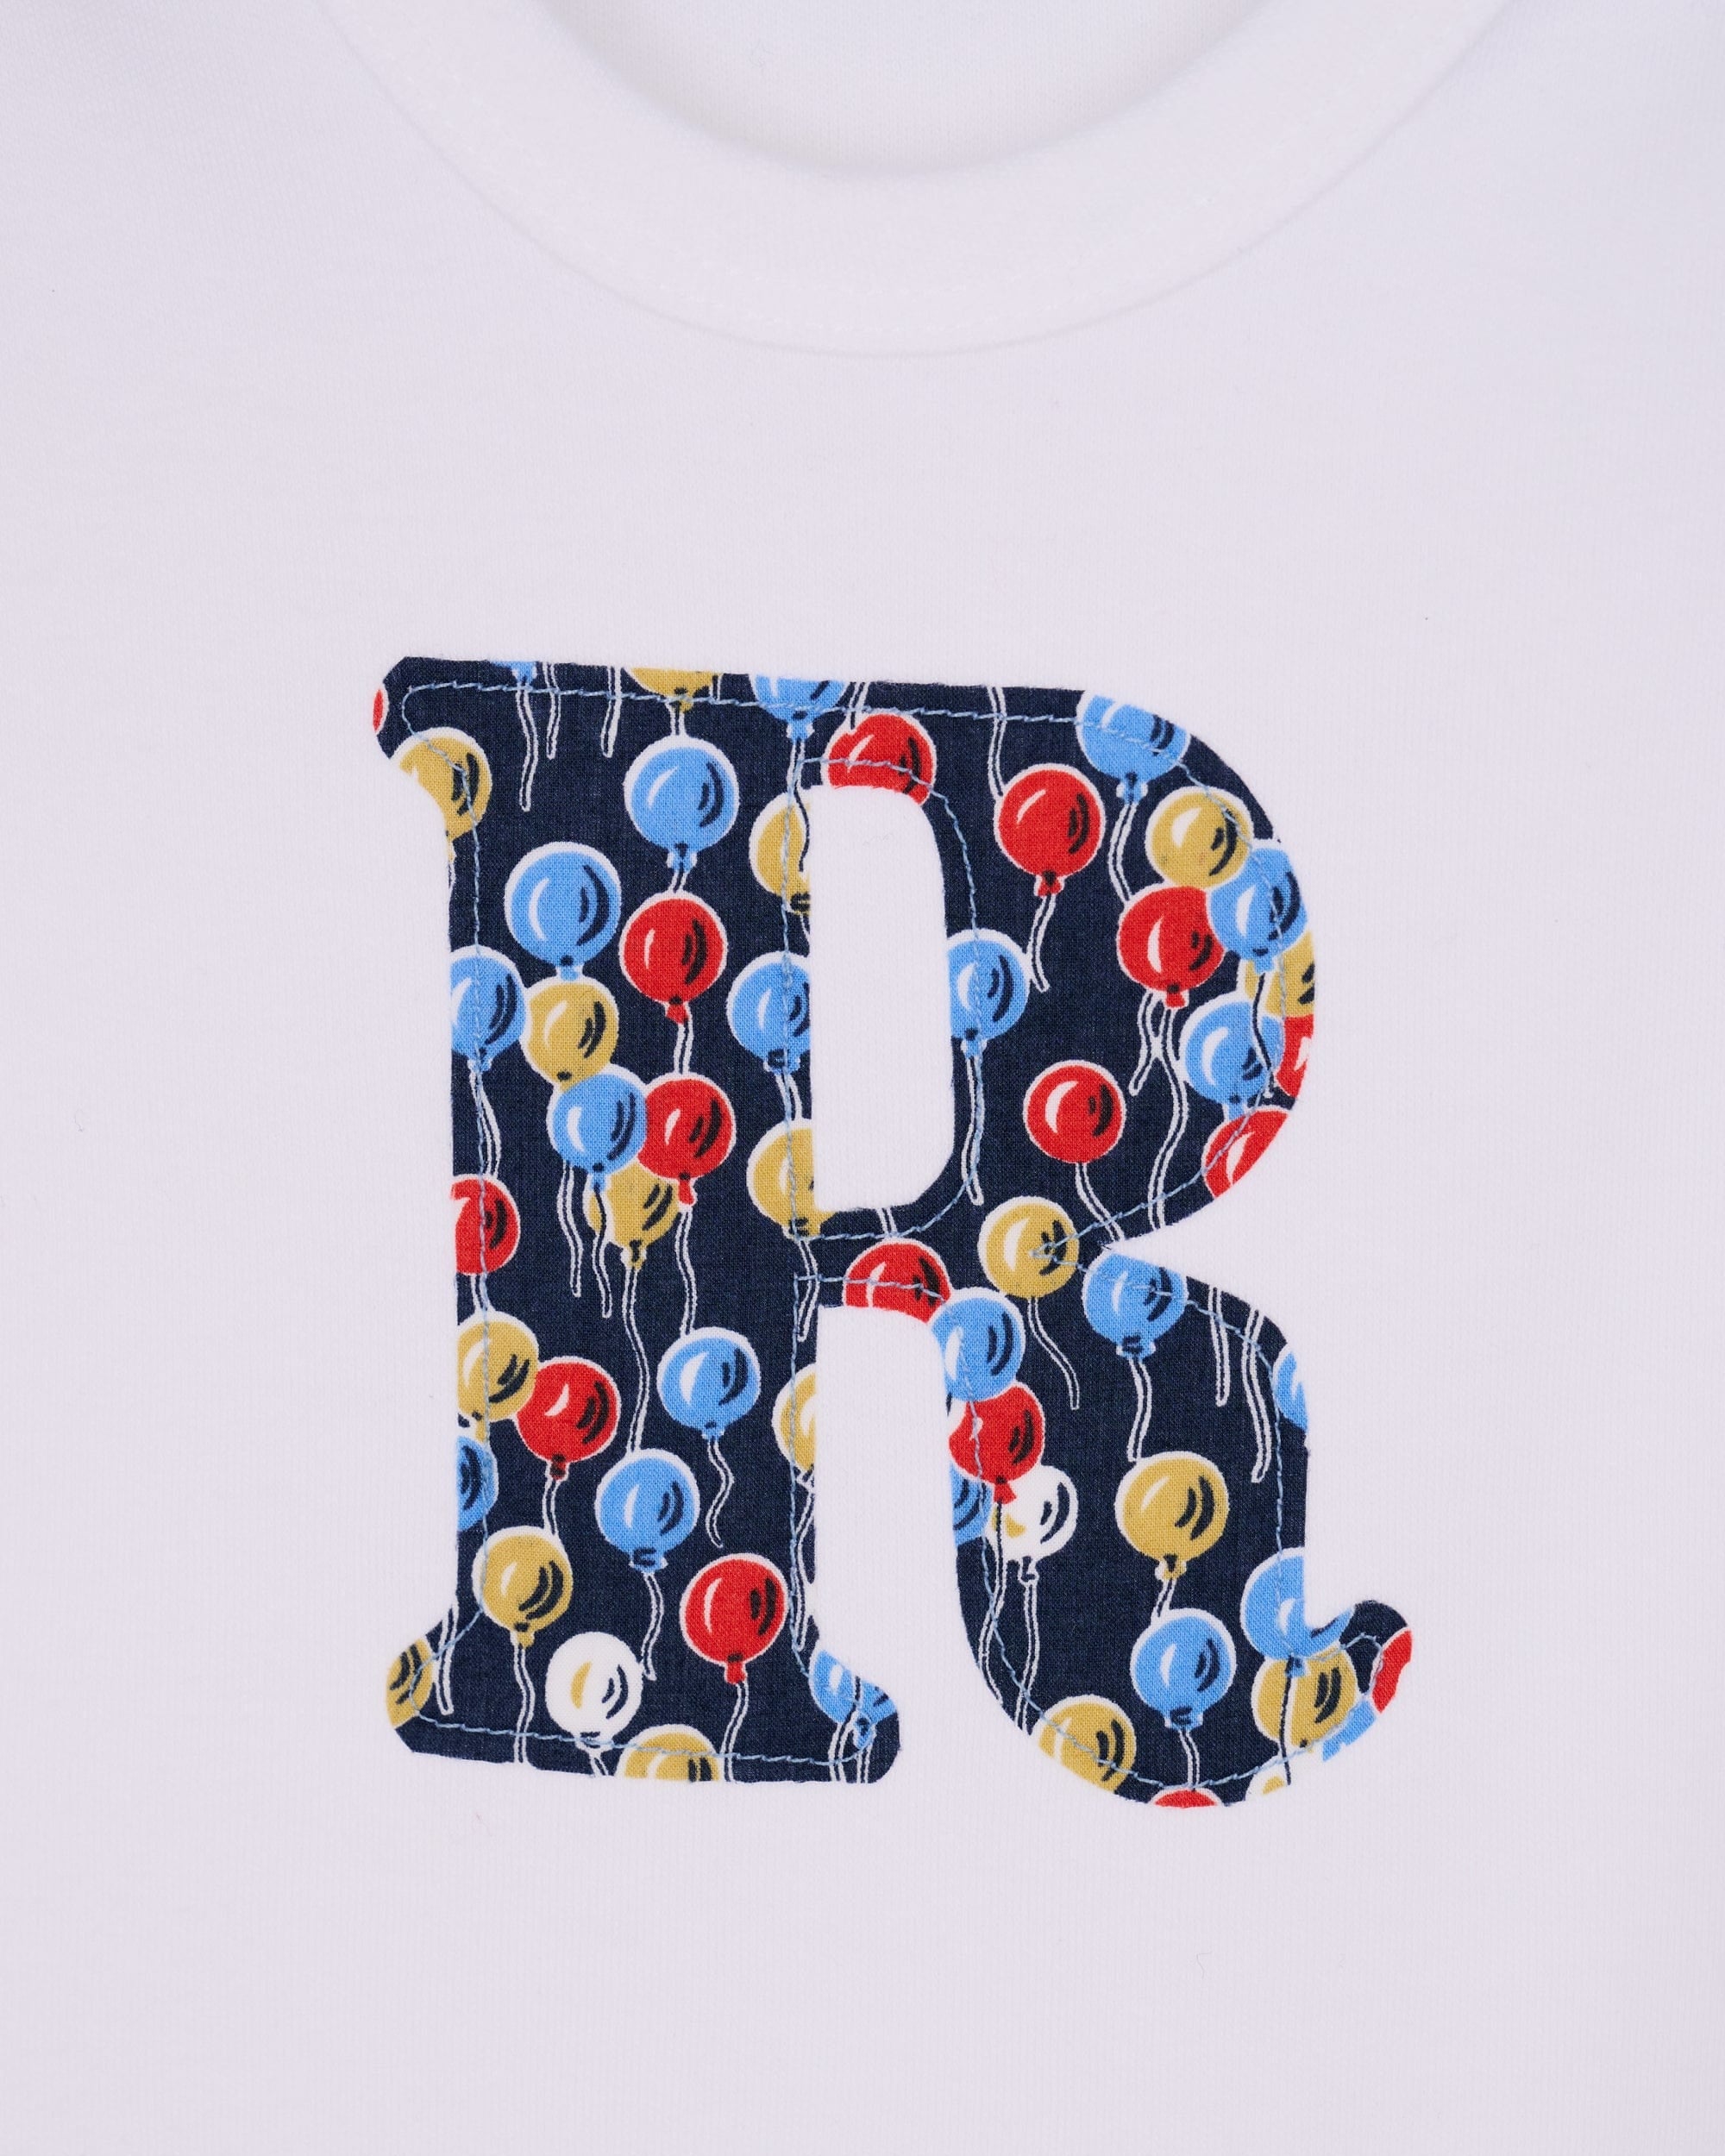 Magnificent Stanley Bodysuit Personalised Bodysuit in Ethan's Party Liberty Print